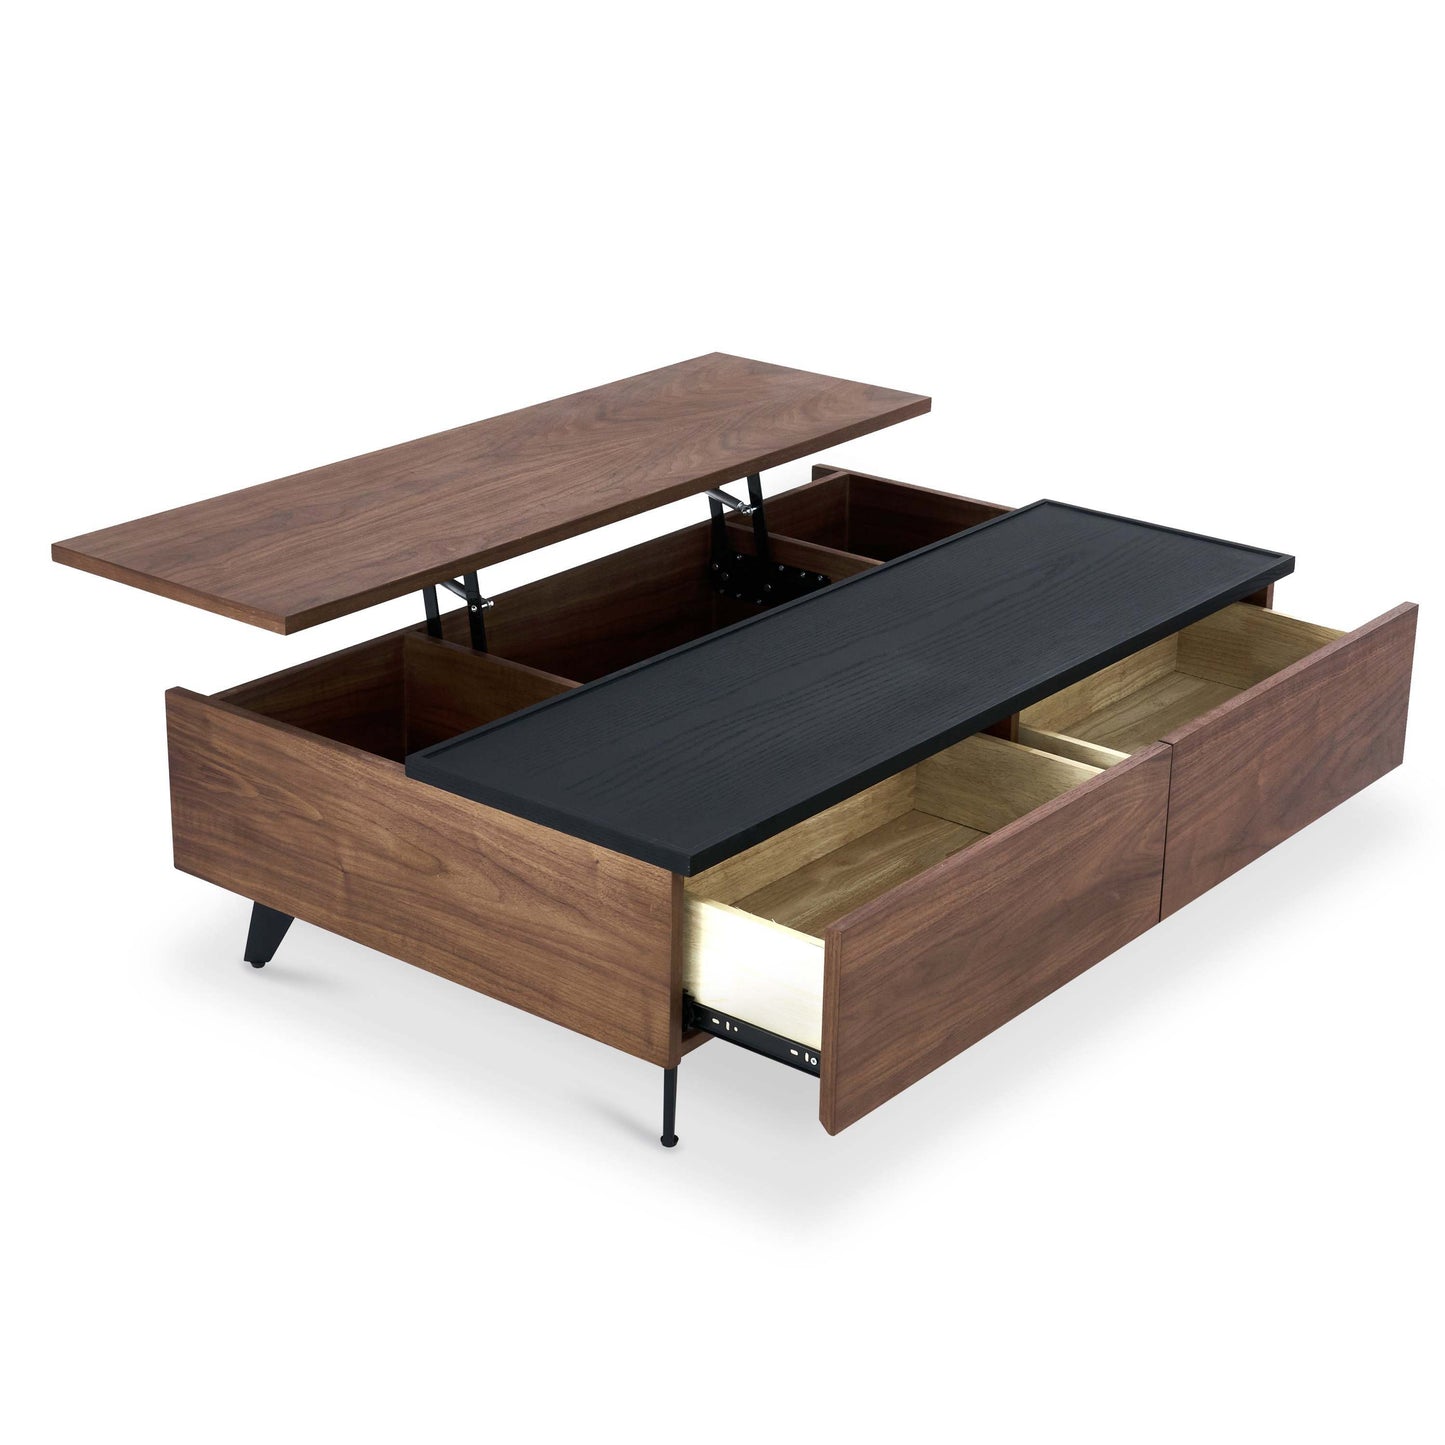 43.3 Stylish Convertible Coffee Table with Storage